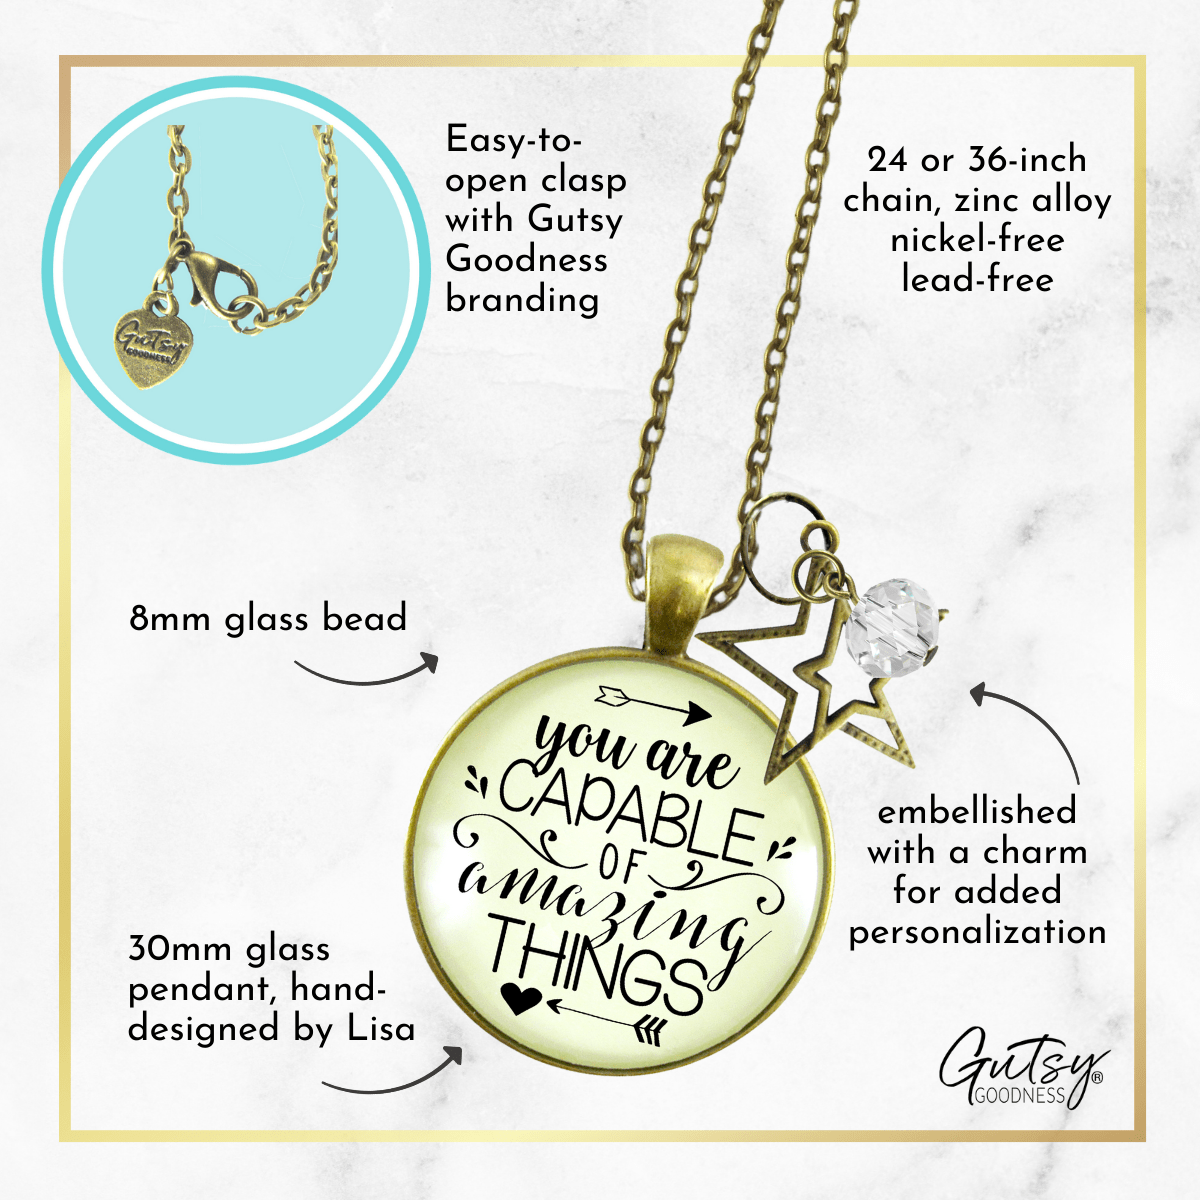 Gutsy Goodness You are Capable of Amazing Things Necklace Positive Quote Women Charm Jewelry - Gutsy Goodness Handmade Jewelry;You Are Capable Of Amazing Things Necklace Positive Quote Women Charm Jewelry - Gutsy Goodness Handmade Jewelry Gifts